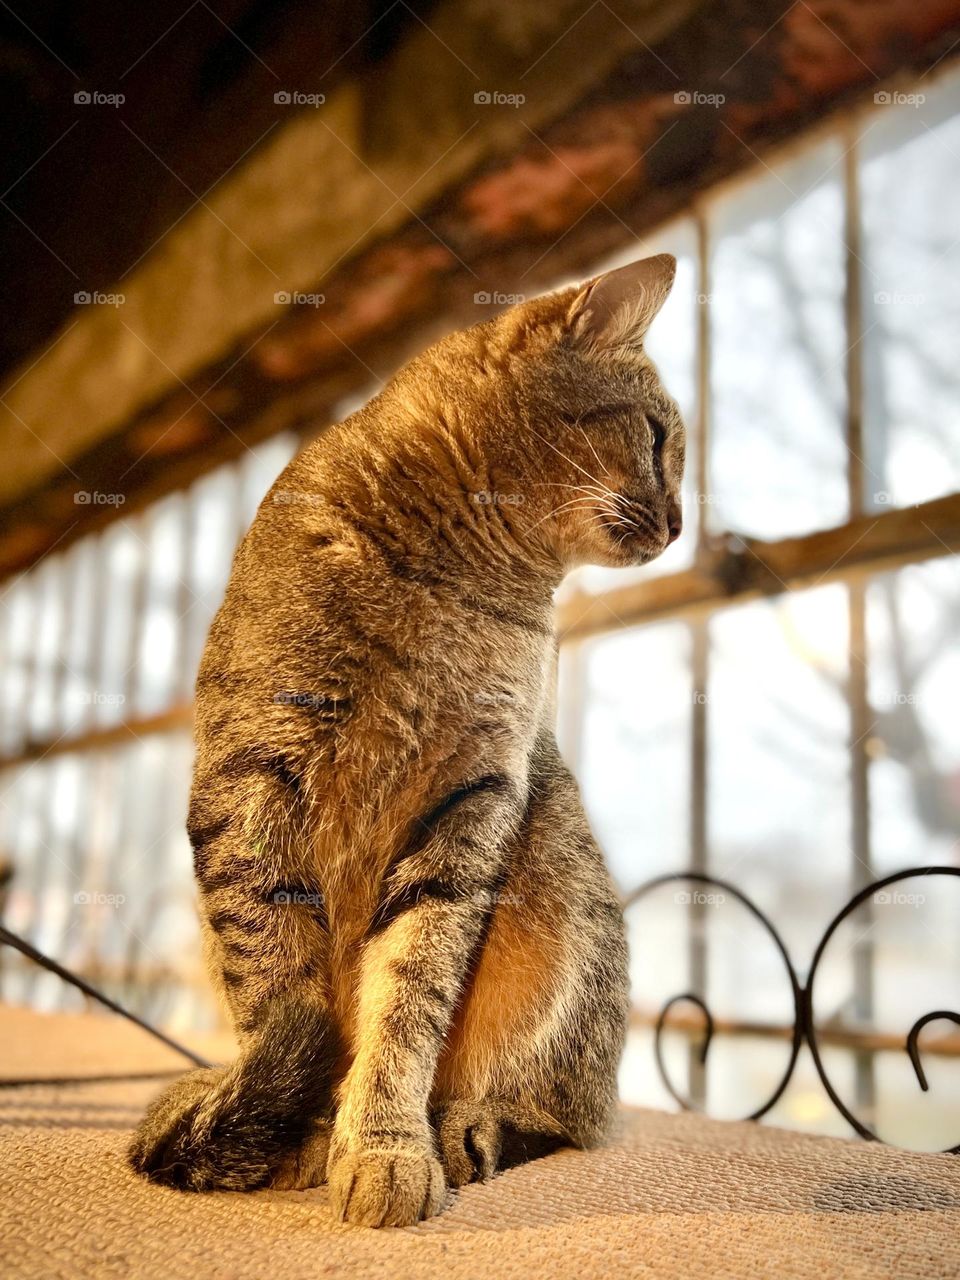 Store cat sitting on high shelf looking out window to rainy winter day. The panes vanish in perspective.